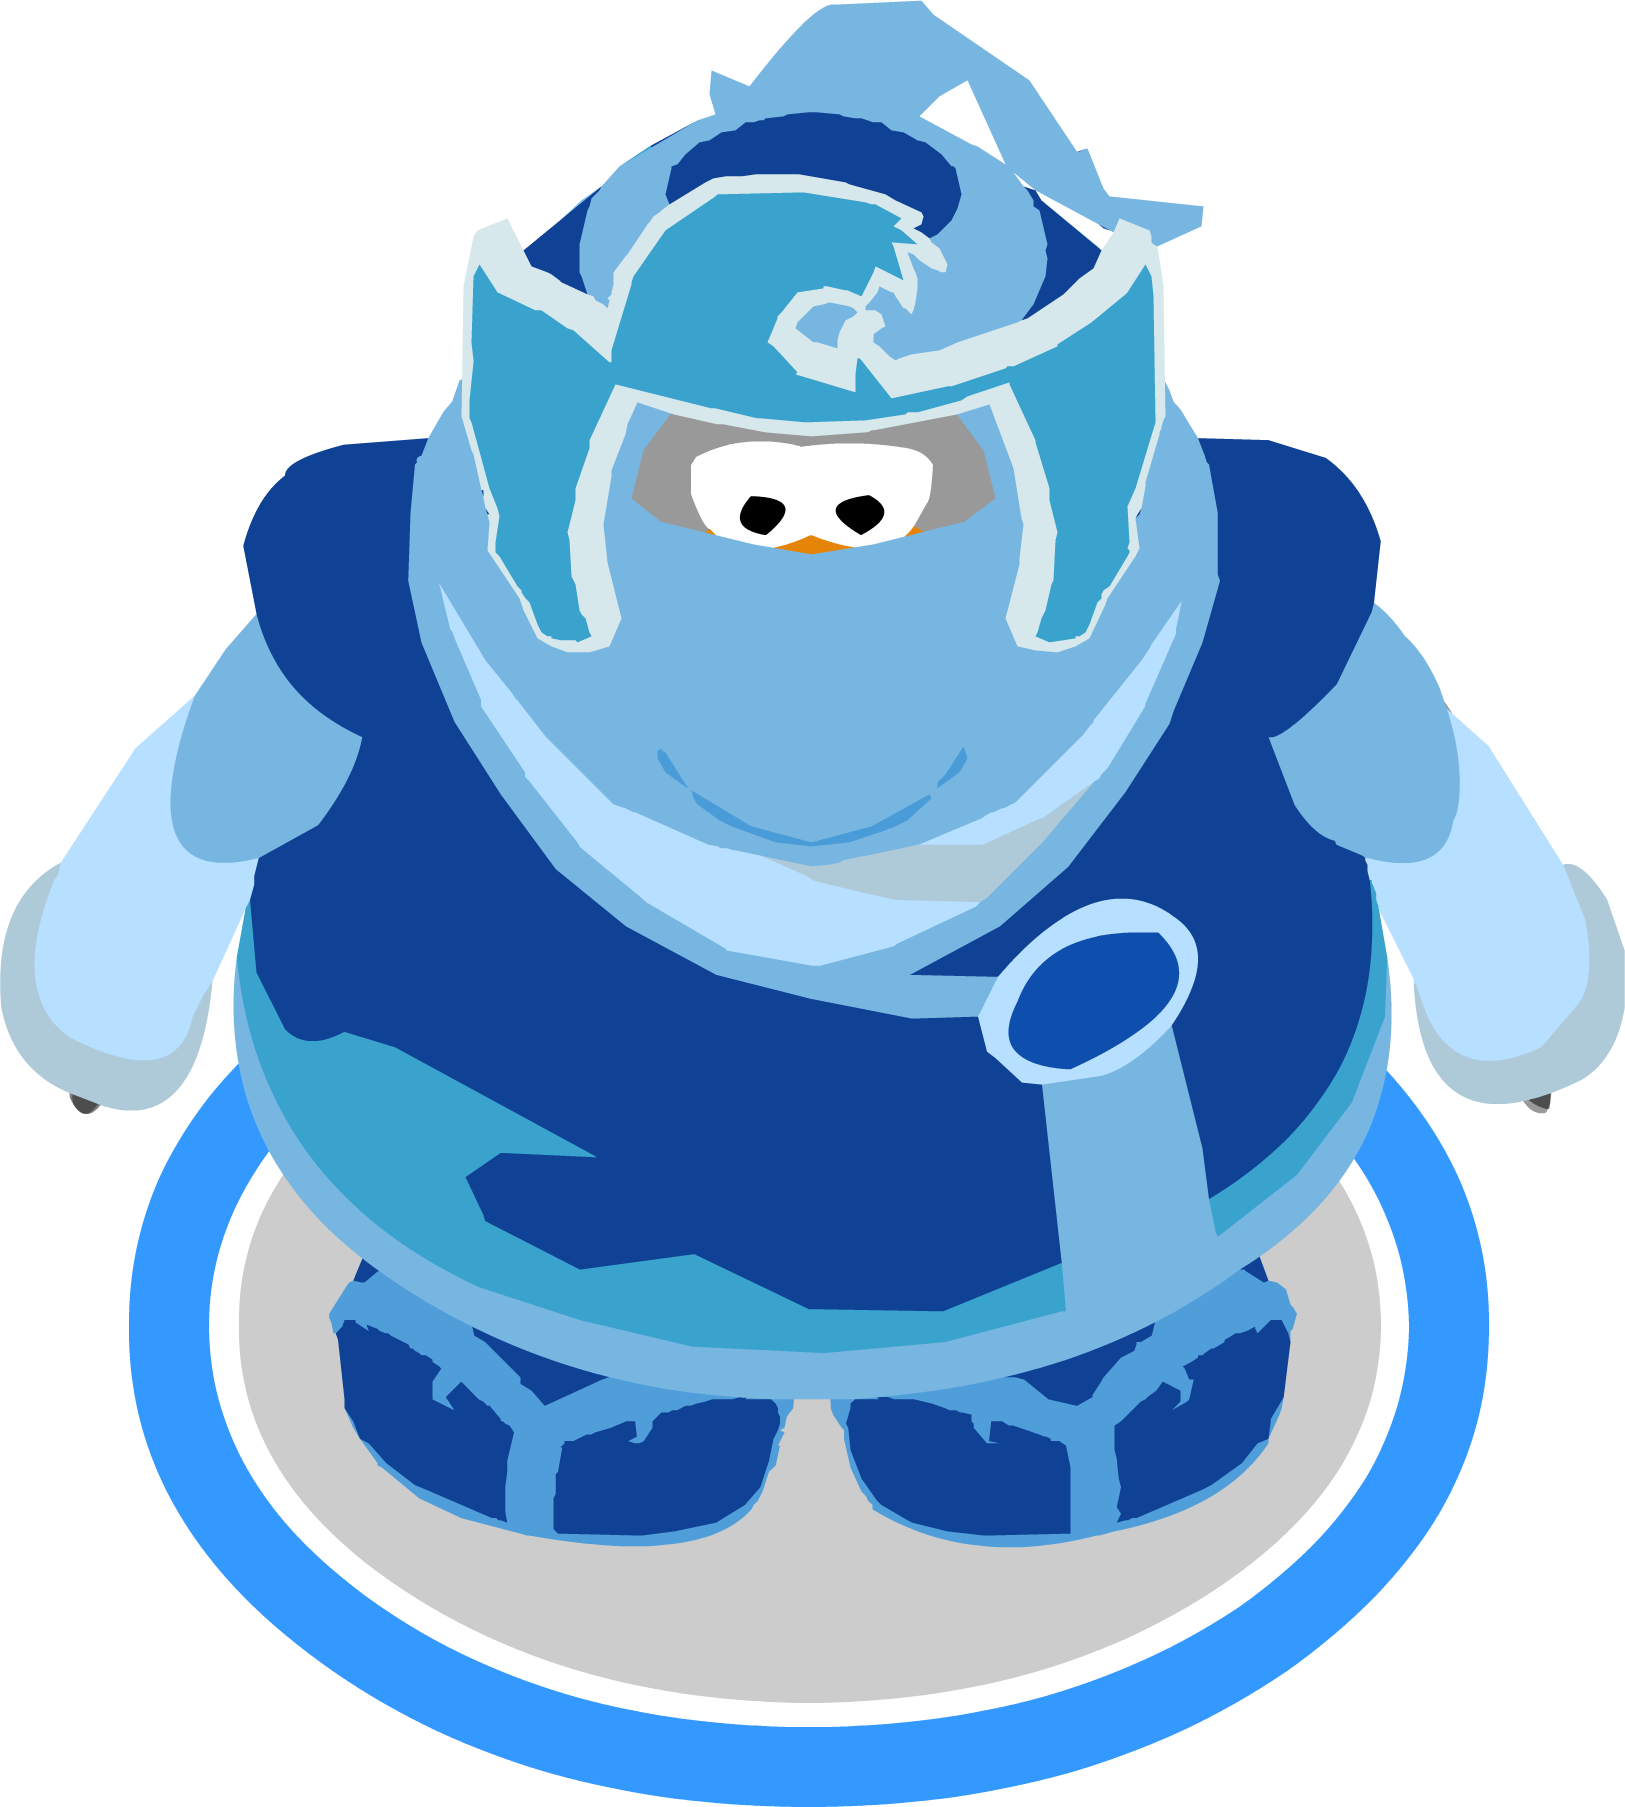 https://static.wikia.nocookie.net/clubpenguin/images/8/88/Water_suit_in-game.png/revision/latest?cb=20130604124313